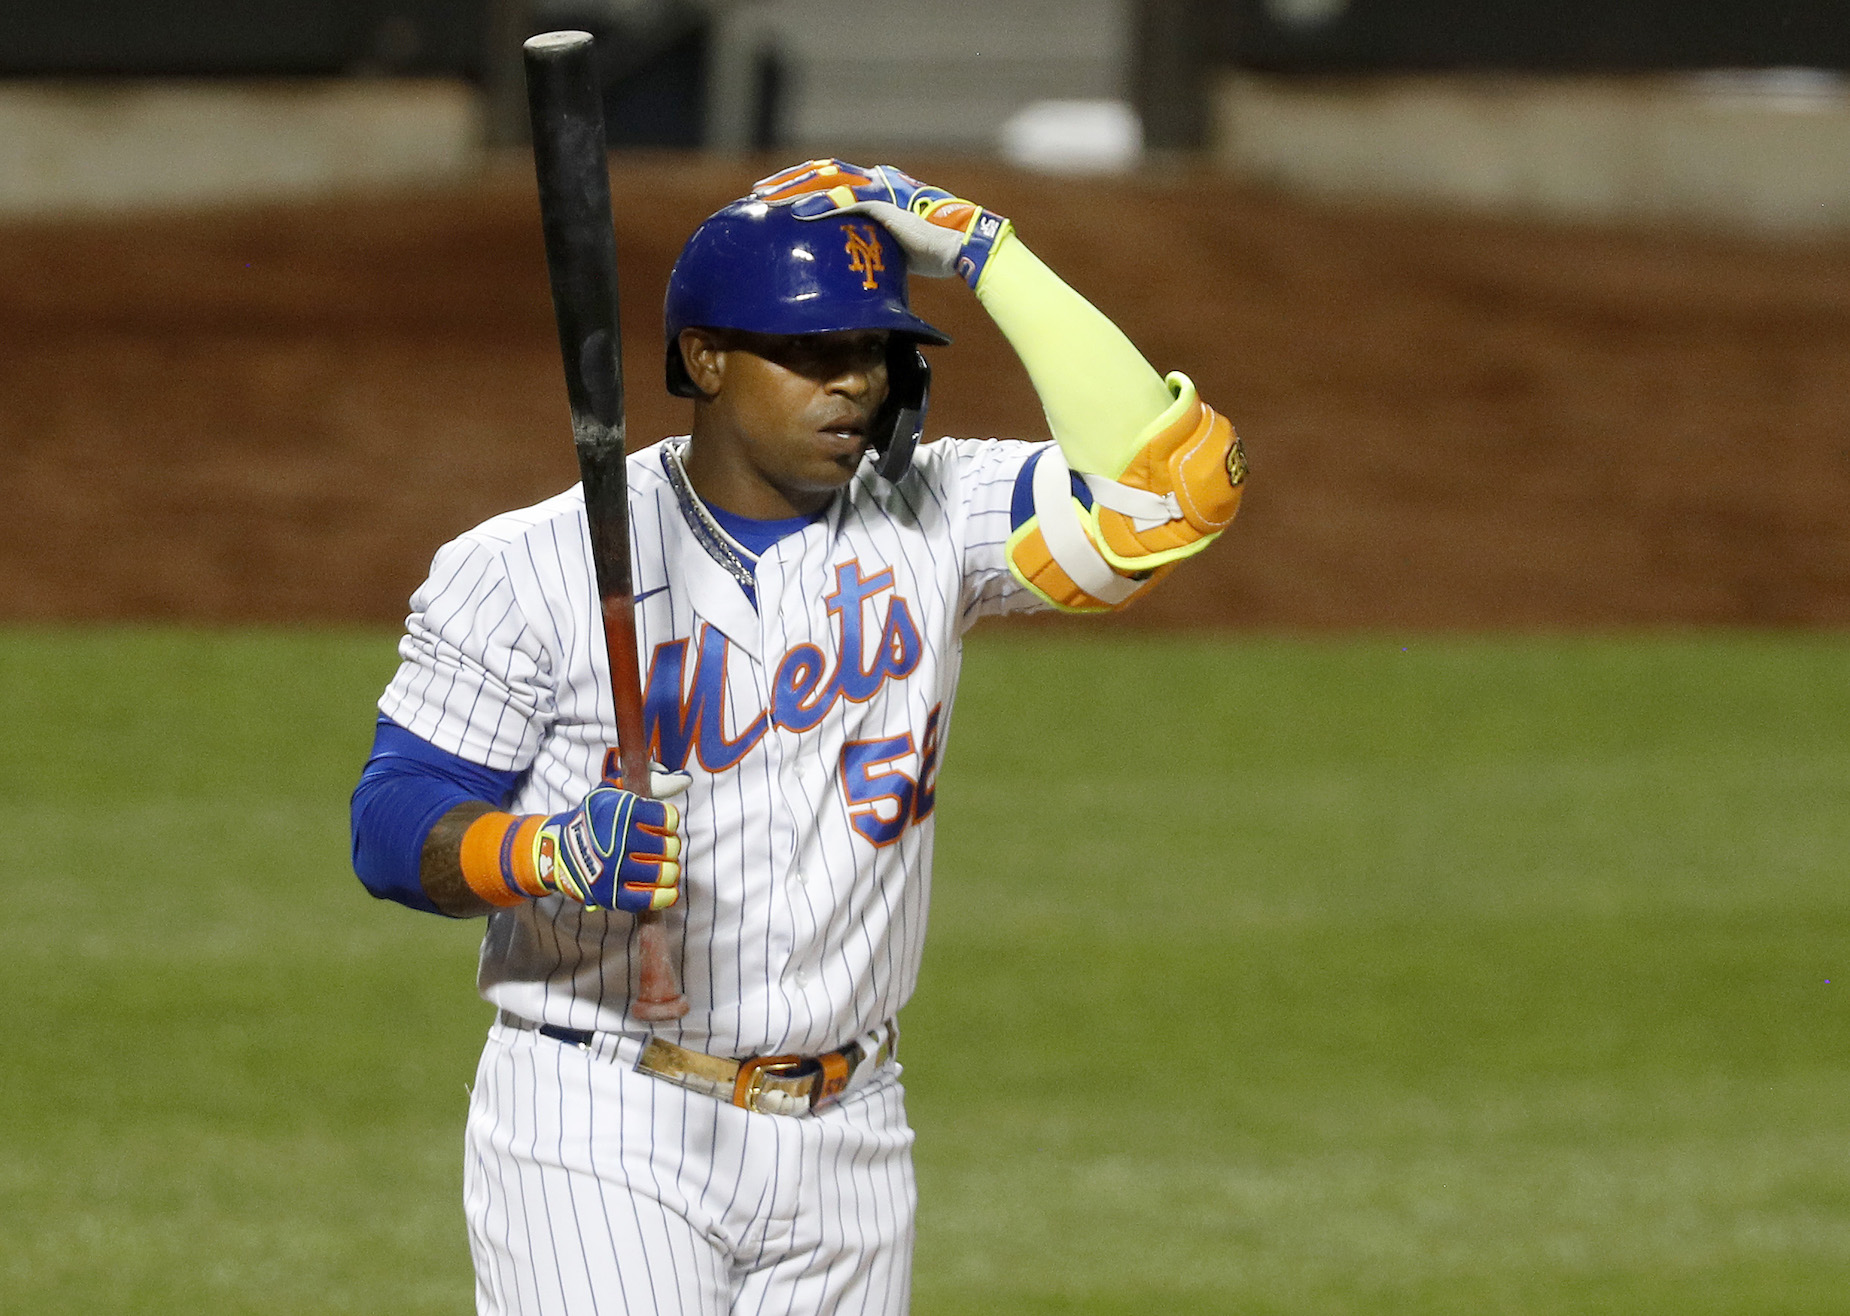 Yoenis Cespedes may have opted out of the 2020 MLB season, but he has plenty of money in the bank.